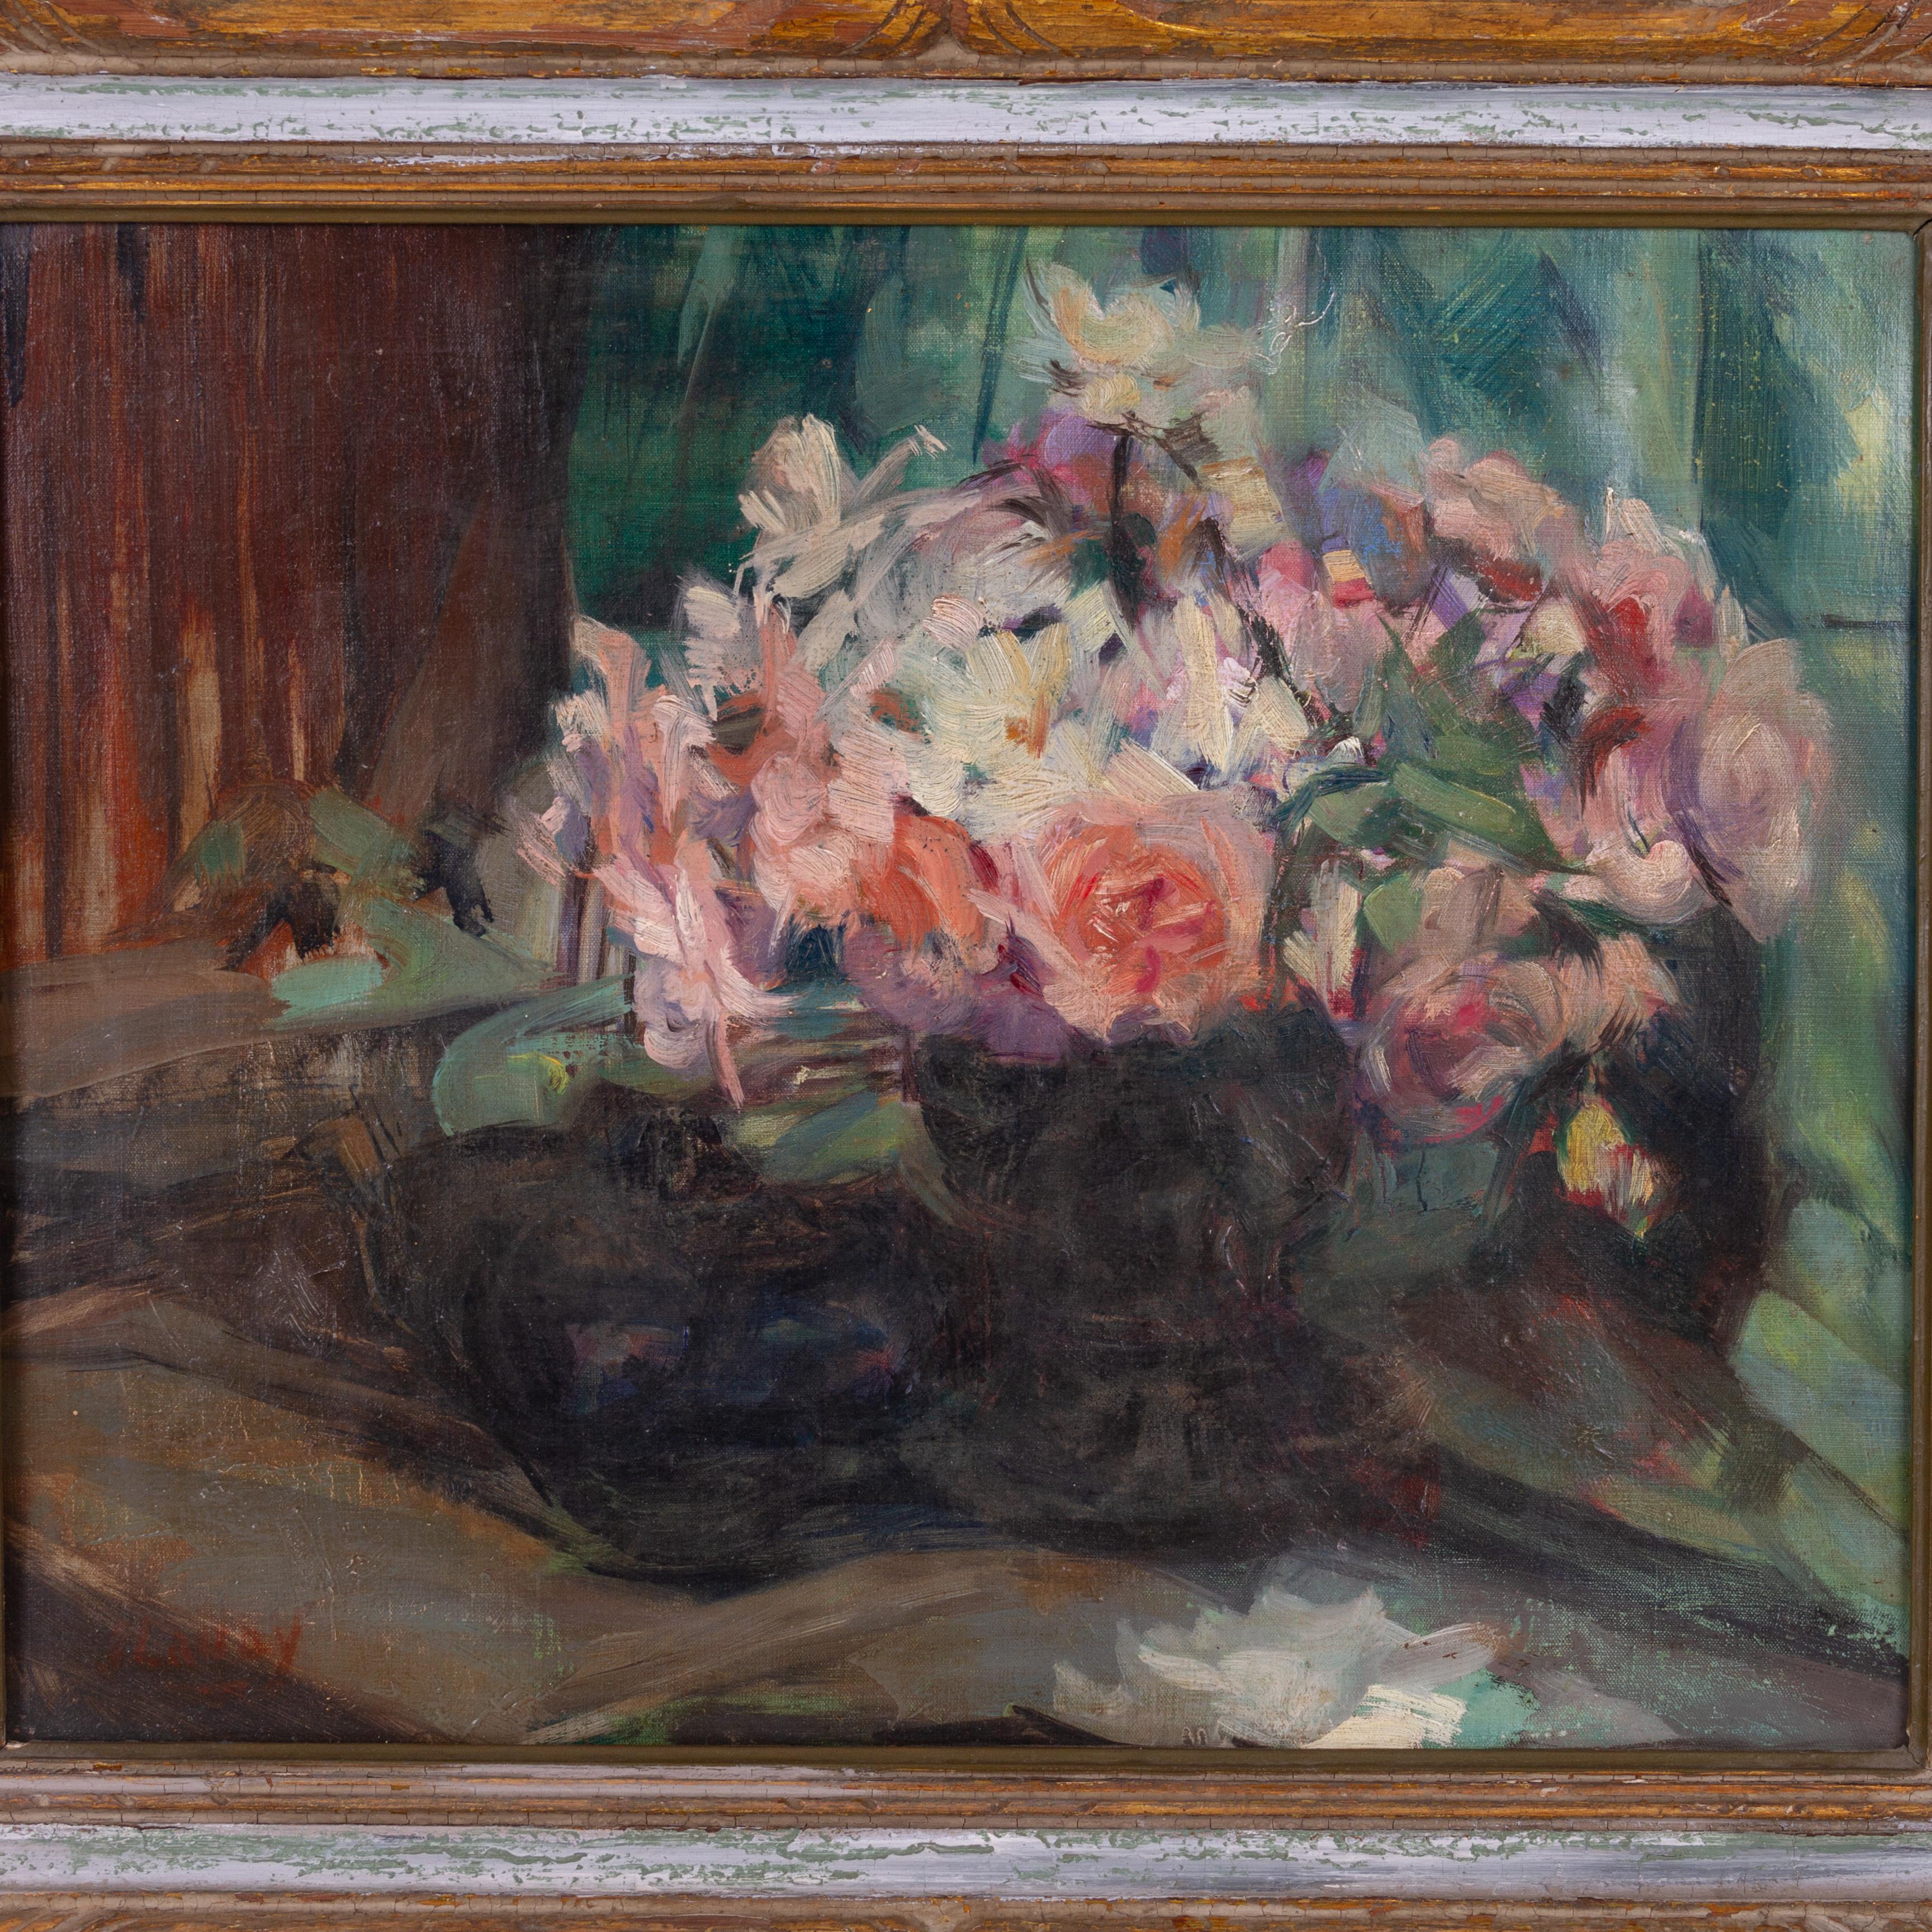 In good condition
From a private collection
Free international shipping
Signed Impressionist Roses Still Life Oil Painting in Giltwood Frame
